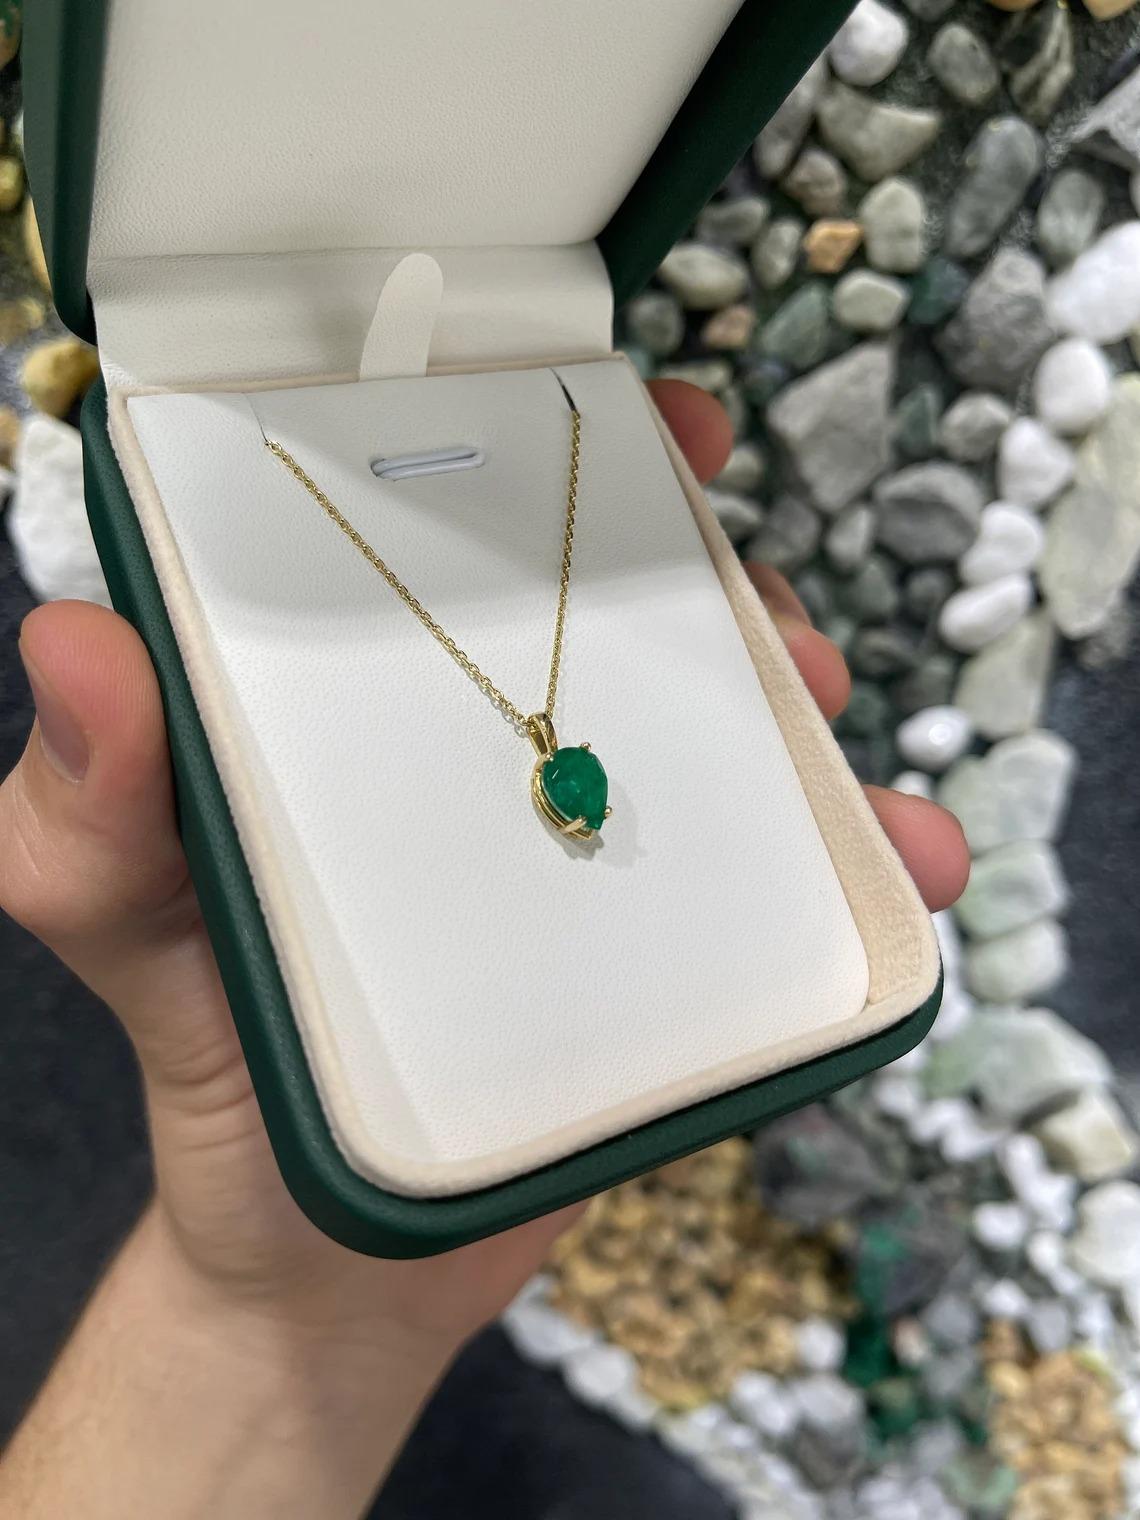 A stunning, solitaire dark vivid green AAA emerald skillfully handcrafted pendant. The lovely, 1.54-carat pear cut emerald showcases excellent shine, dark rare green color, good clarity, and other remarkable characteristics. Set in a solitaire, in